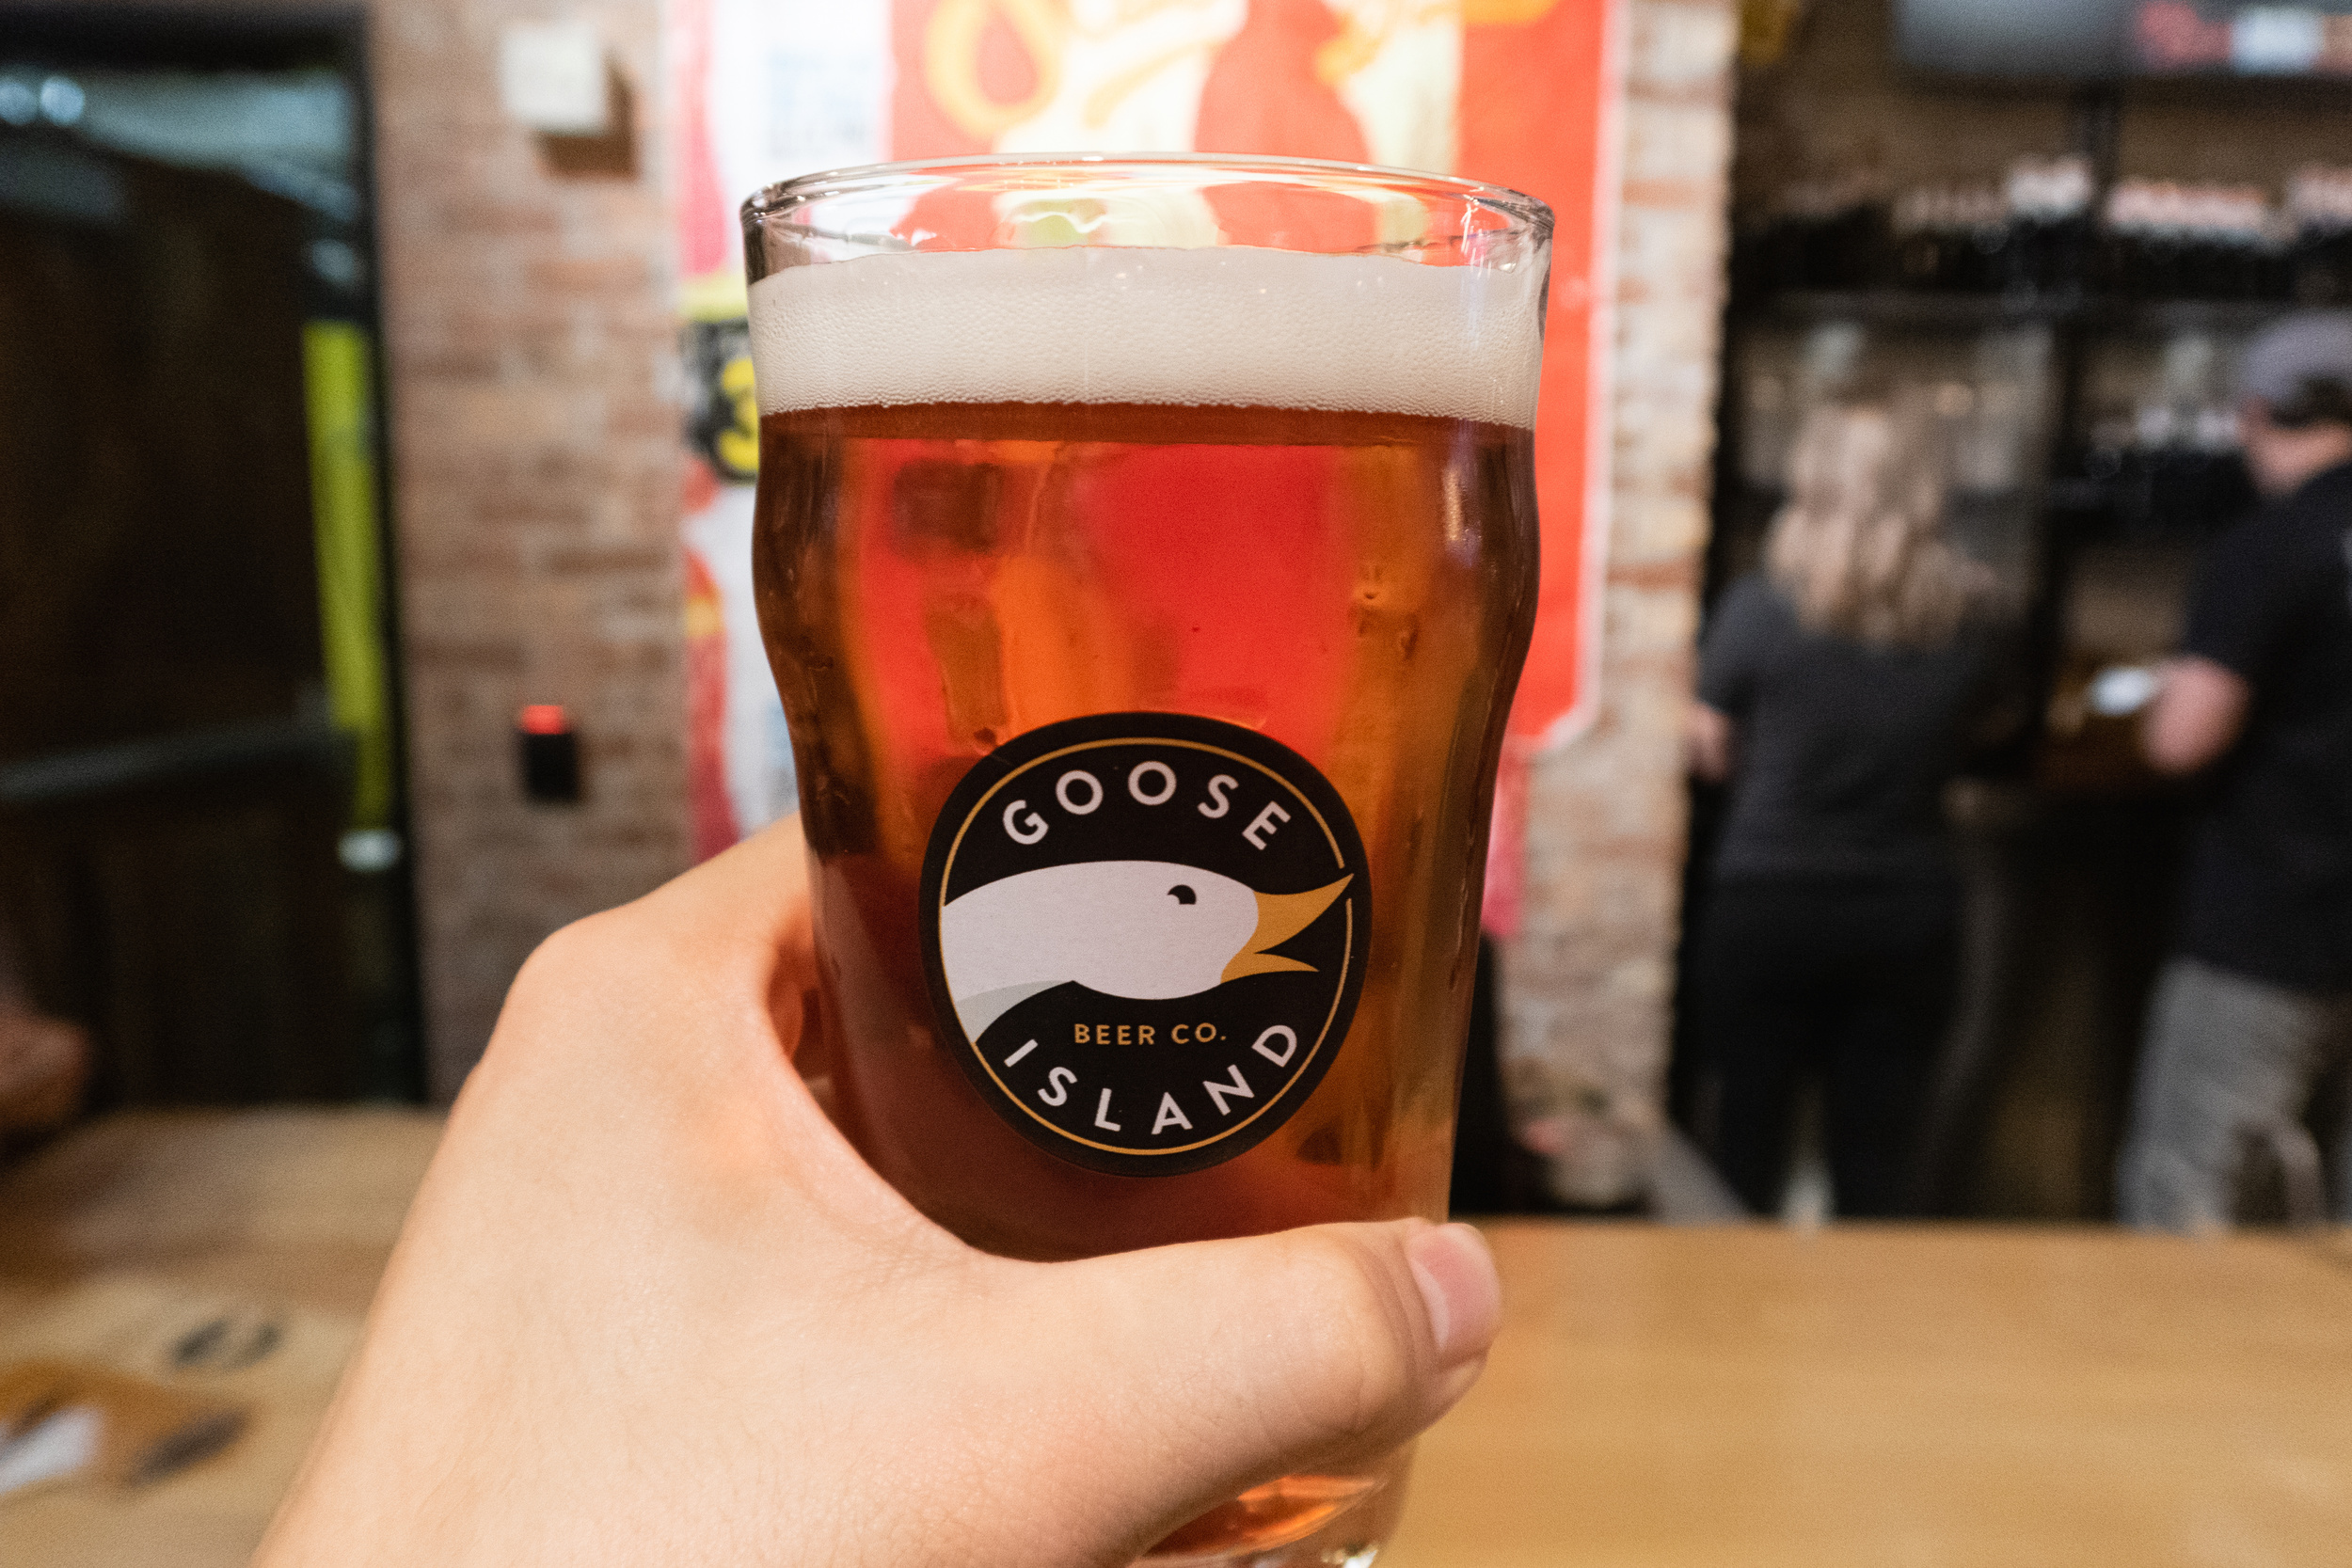 <p>The Chicago-born brewery is recognized nationwide thanks in large part to its iconic goose head tap handles that can be found across bars. Their brewery oozes with an industrial vibe, creating the perfect environment for crushing their Hazy Beer Hug. </p><p><a href='https://www.msn.com/en-us/community/channel/vid-cj9pqbr0vn9in2b6ddcd8sfgpfq6x6utp44fssrv6mc2gtybw0us'>Did you enjoy this slideshow? Follow us on MSN to see more of our exclusive lifestyle content.</a></p>